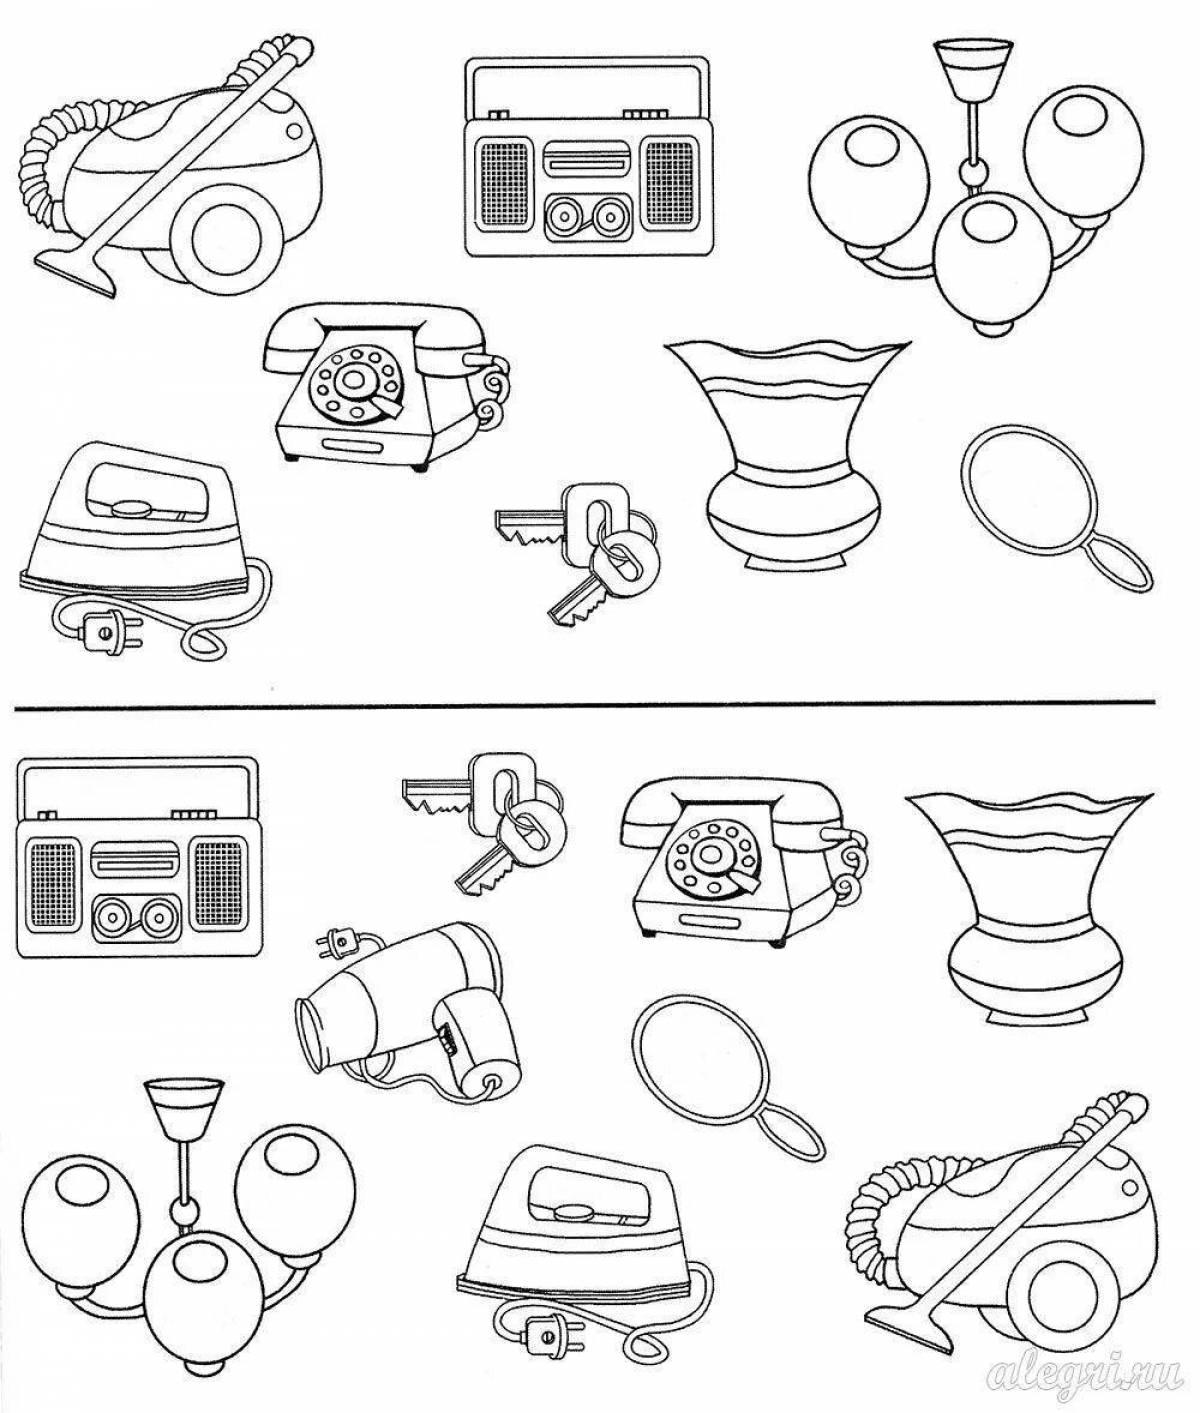 Coloring book charming furniture home appliances